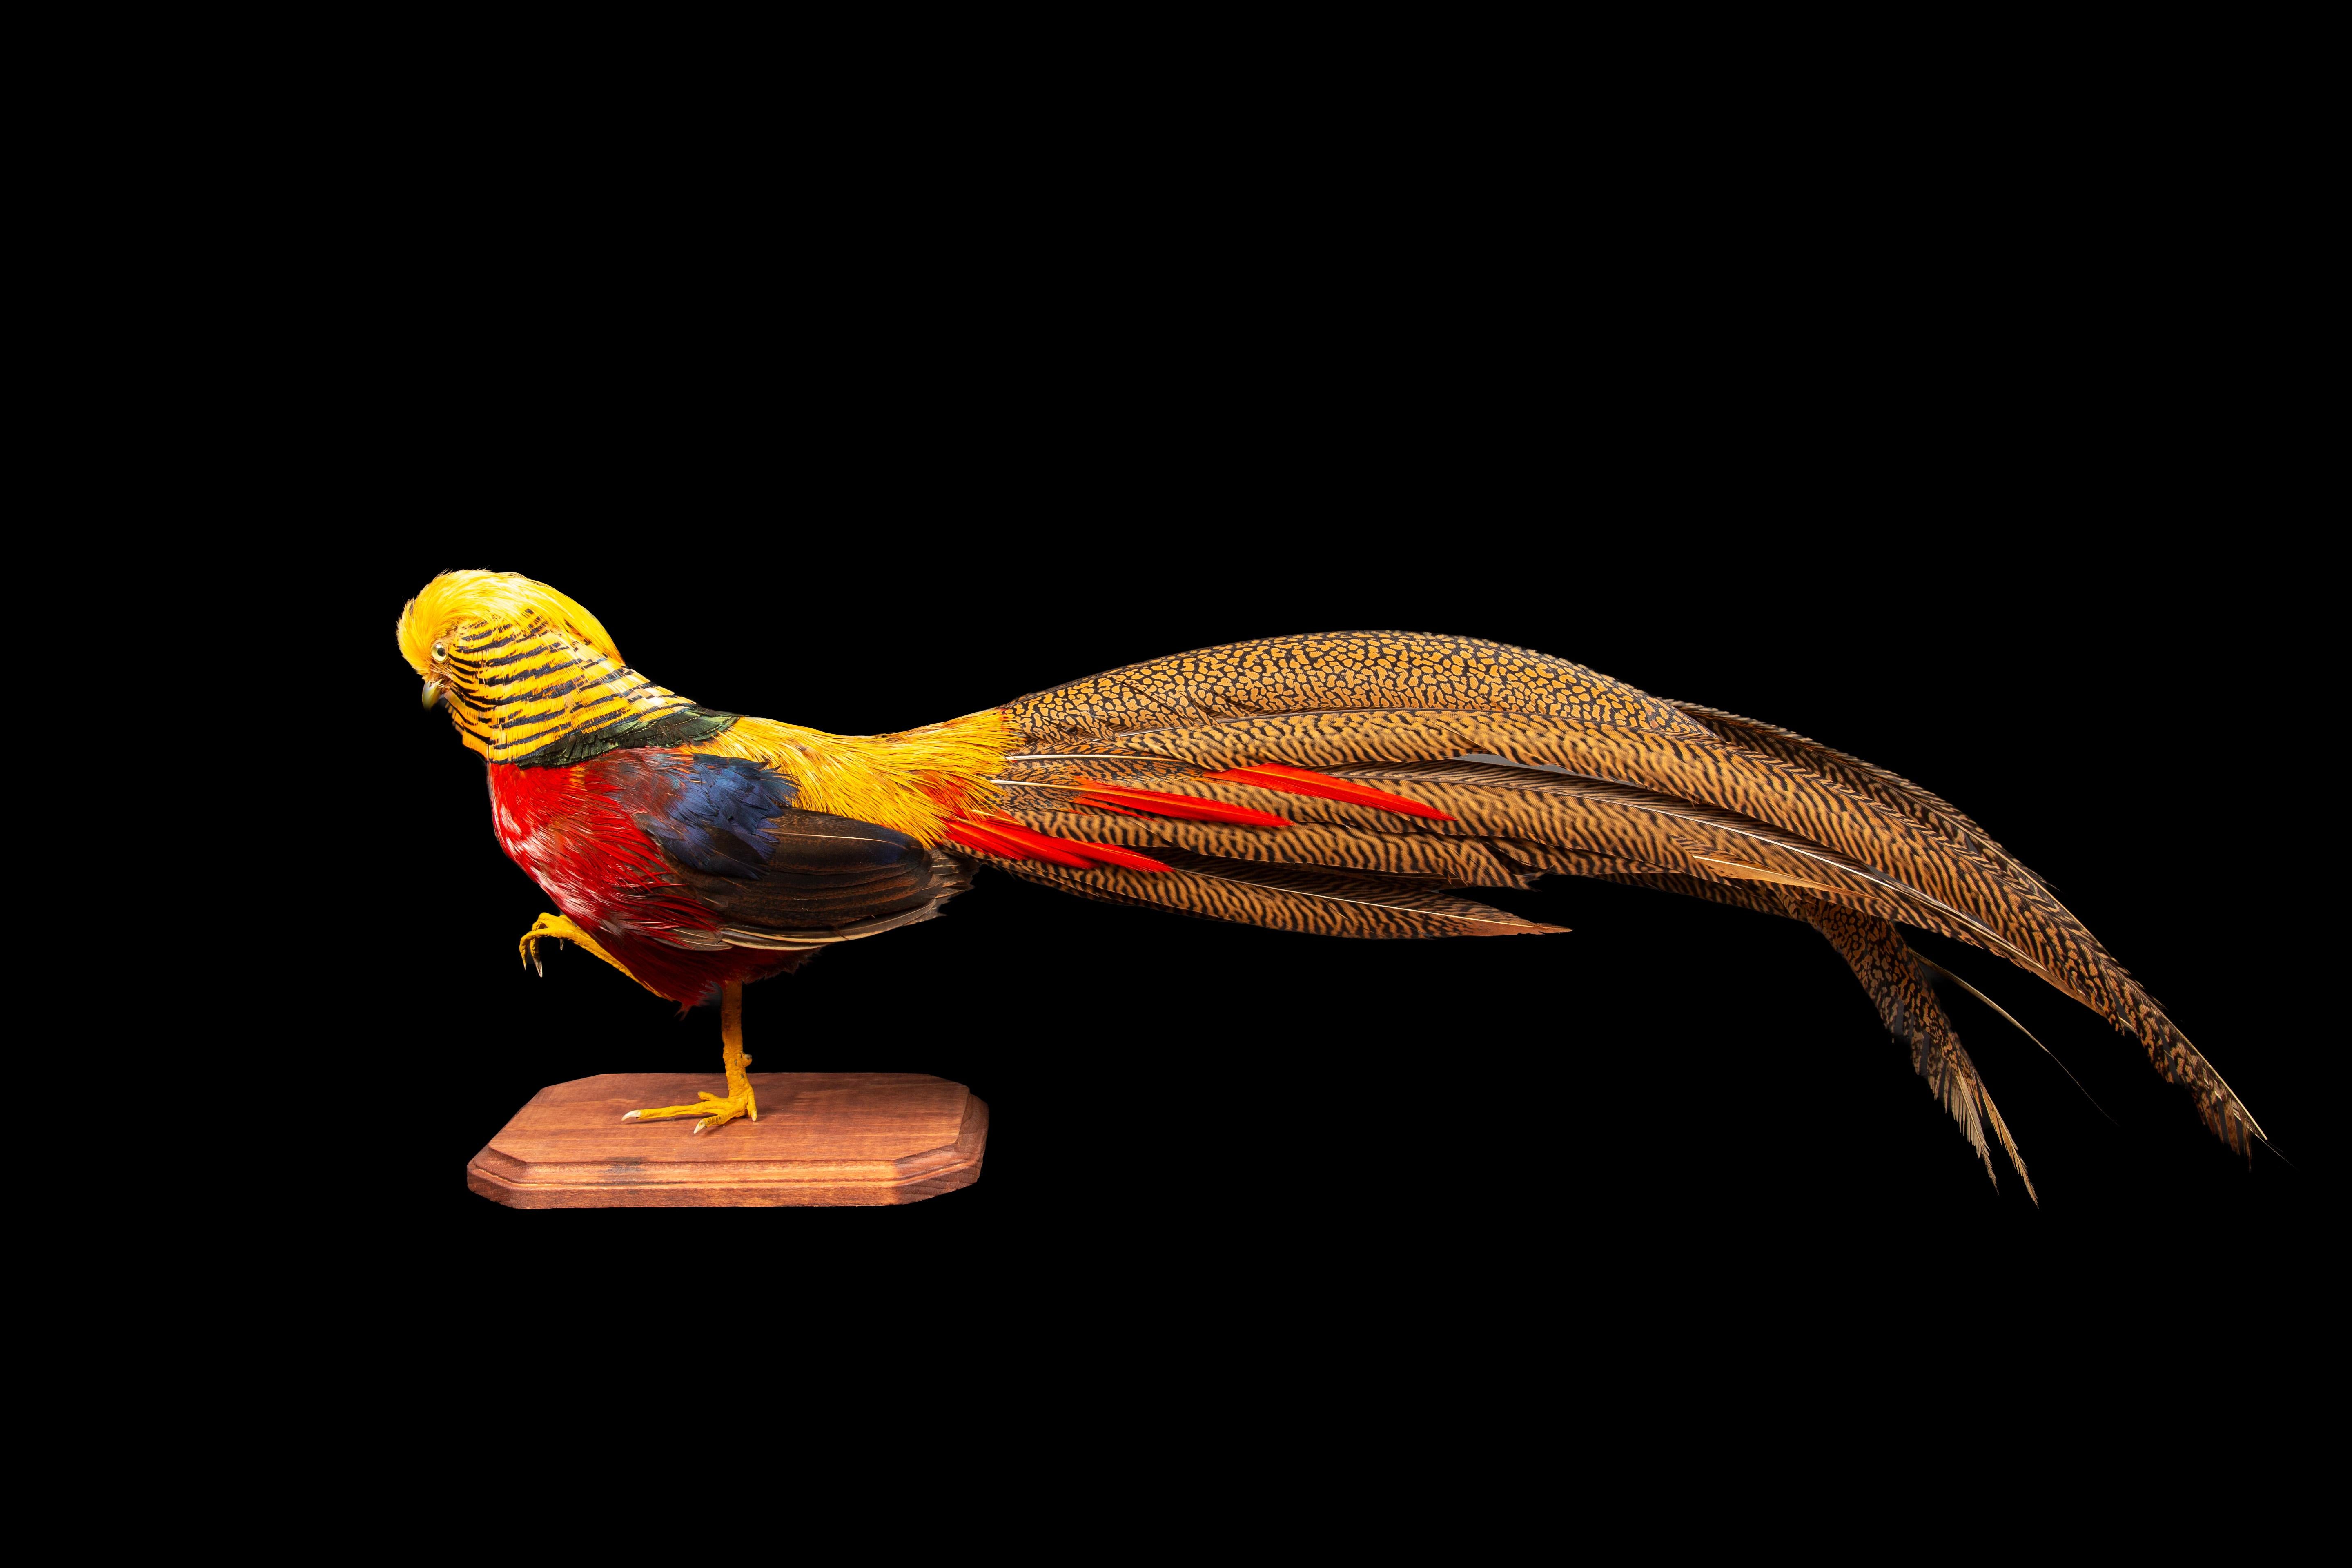 Exquisite in every detail, this meticulously crafted taxidermy specimen showcases the resplendent beauty of the Red Golden Pheasant (Chrysolophus pictus), affectionately known as the Chinese pheasant and rainbow pheasant. Impeccably preserved, it is